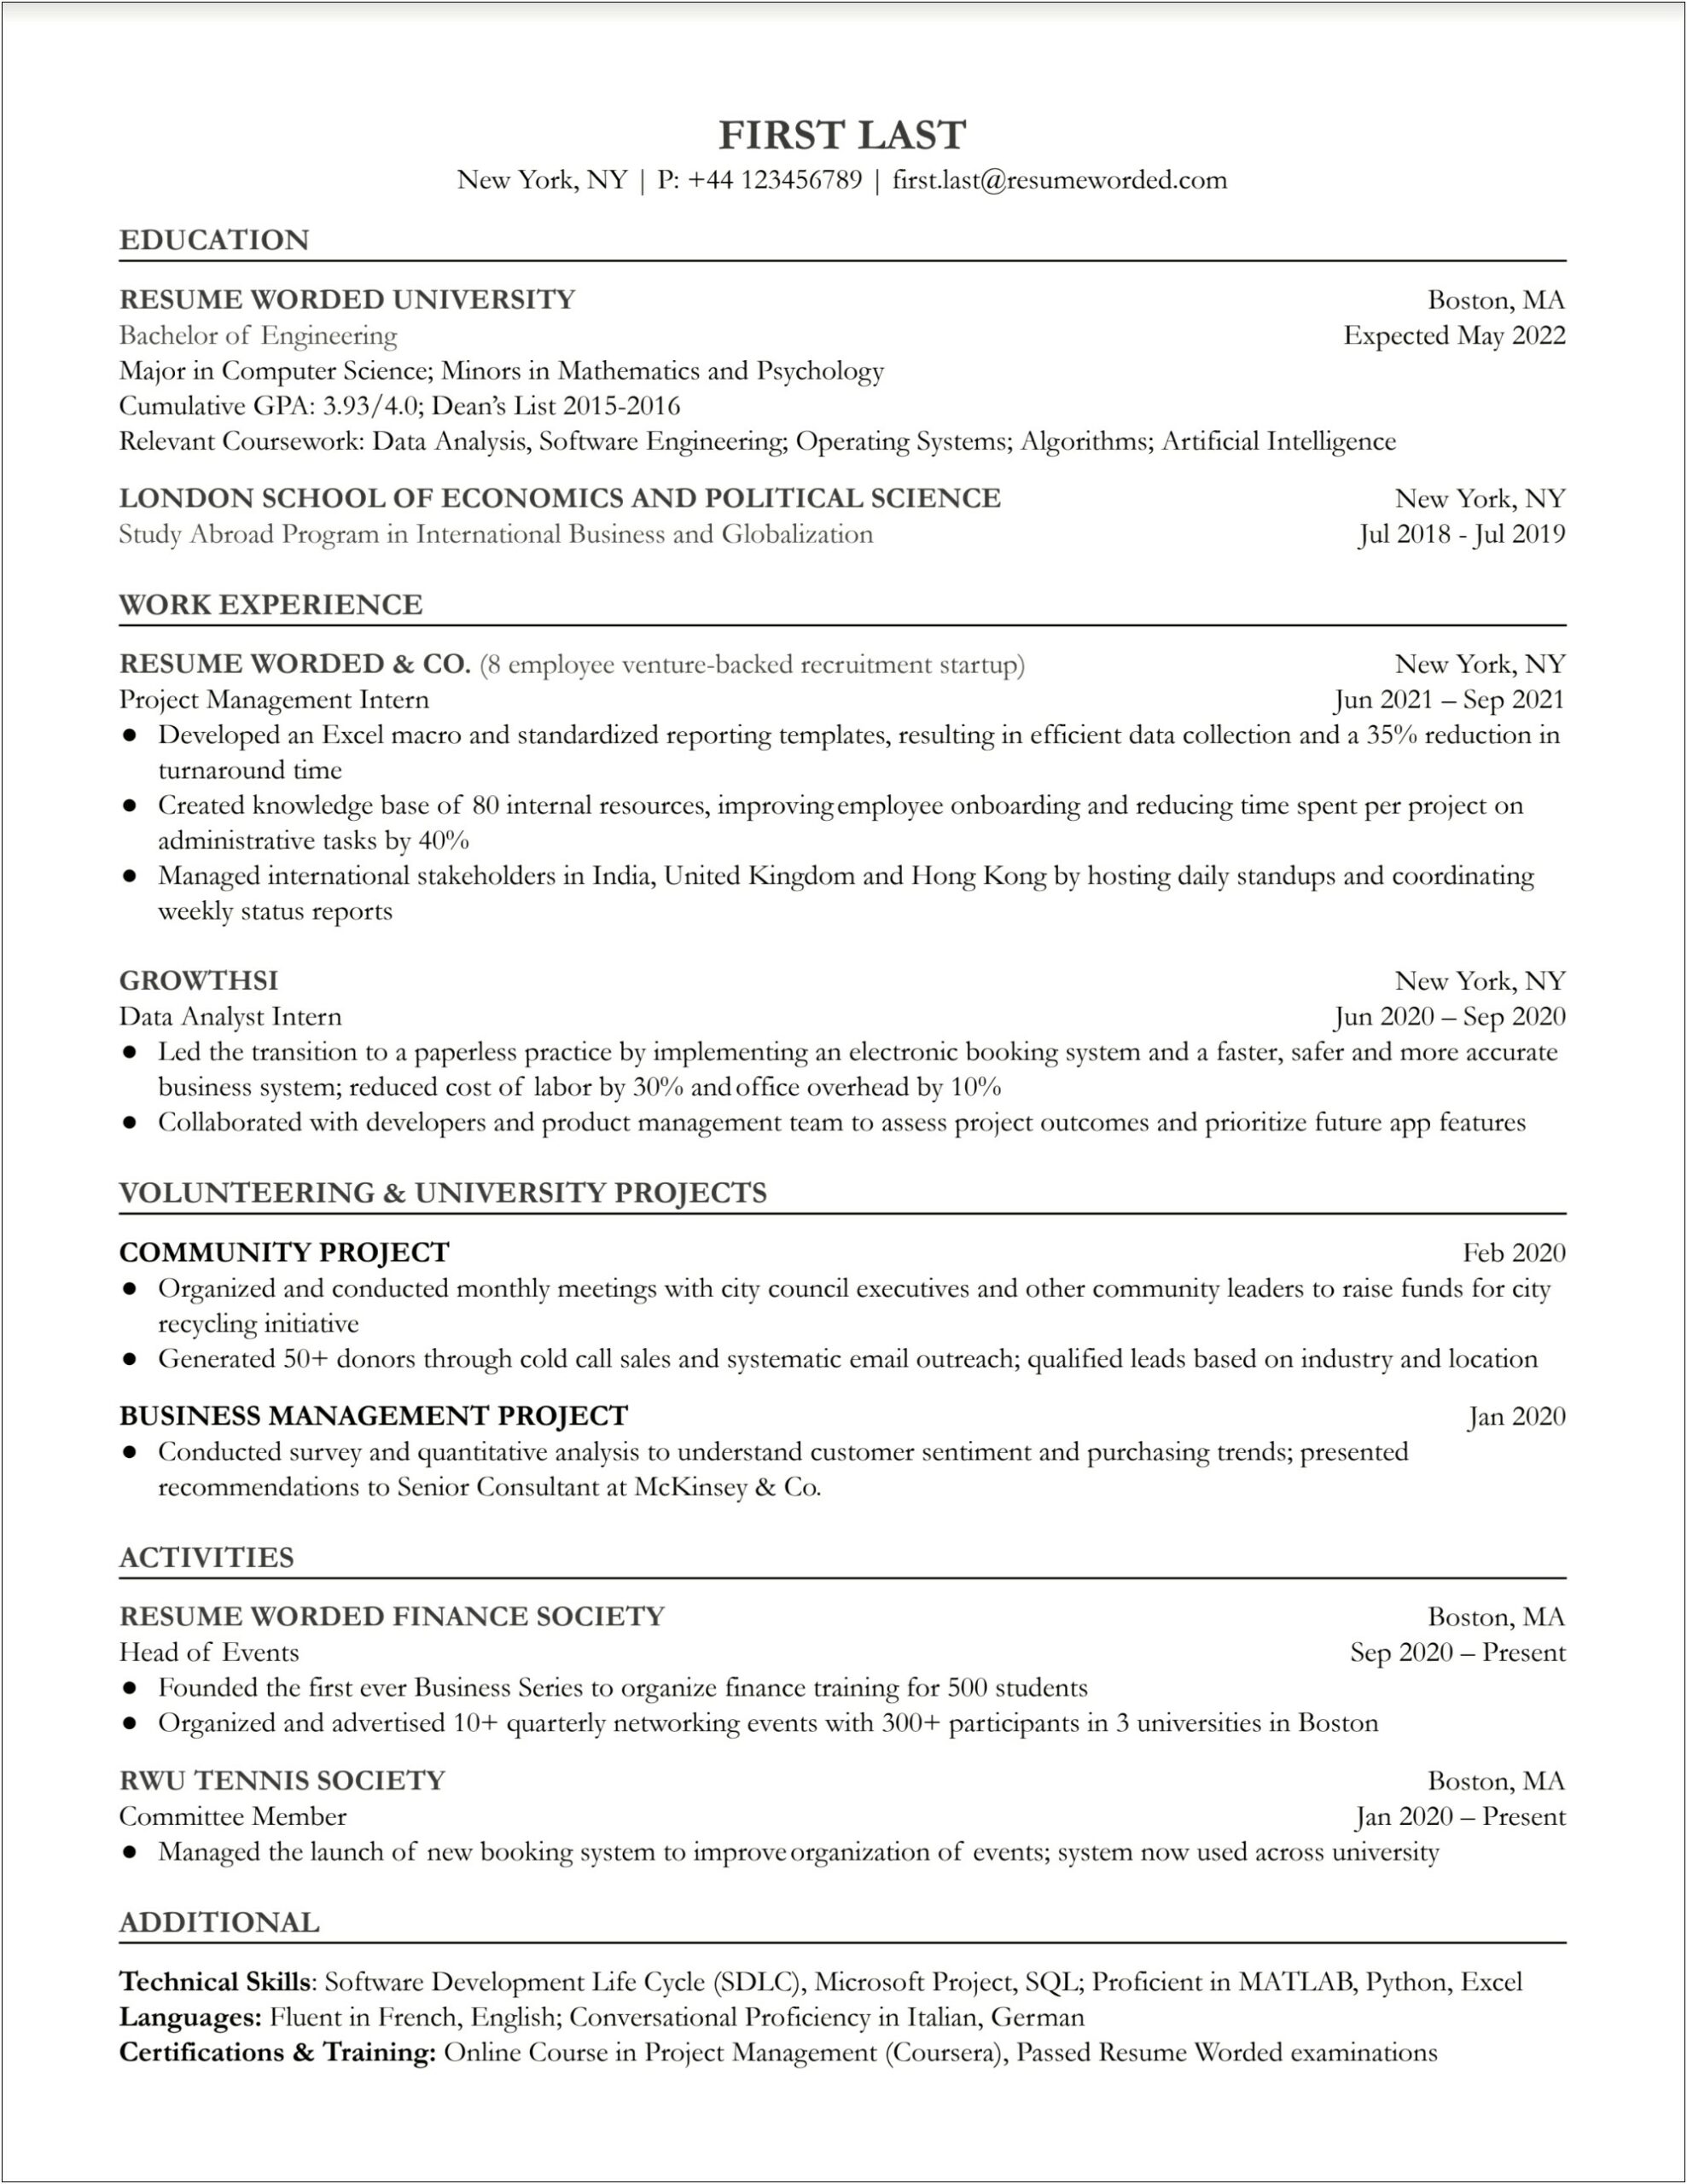 Resume Bullets For Project Management Intern